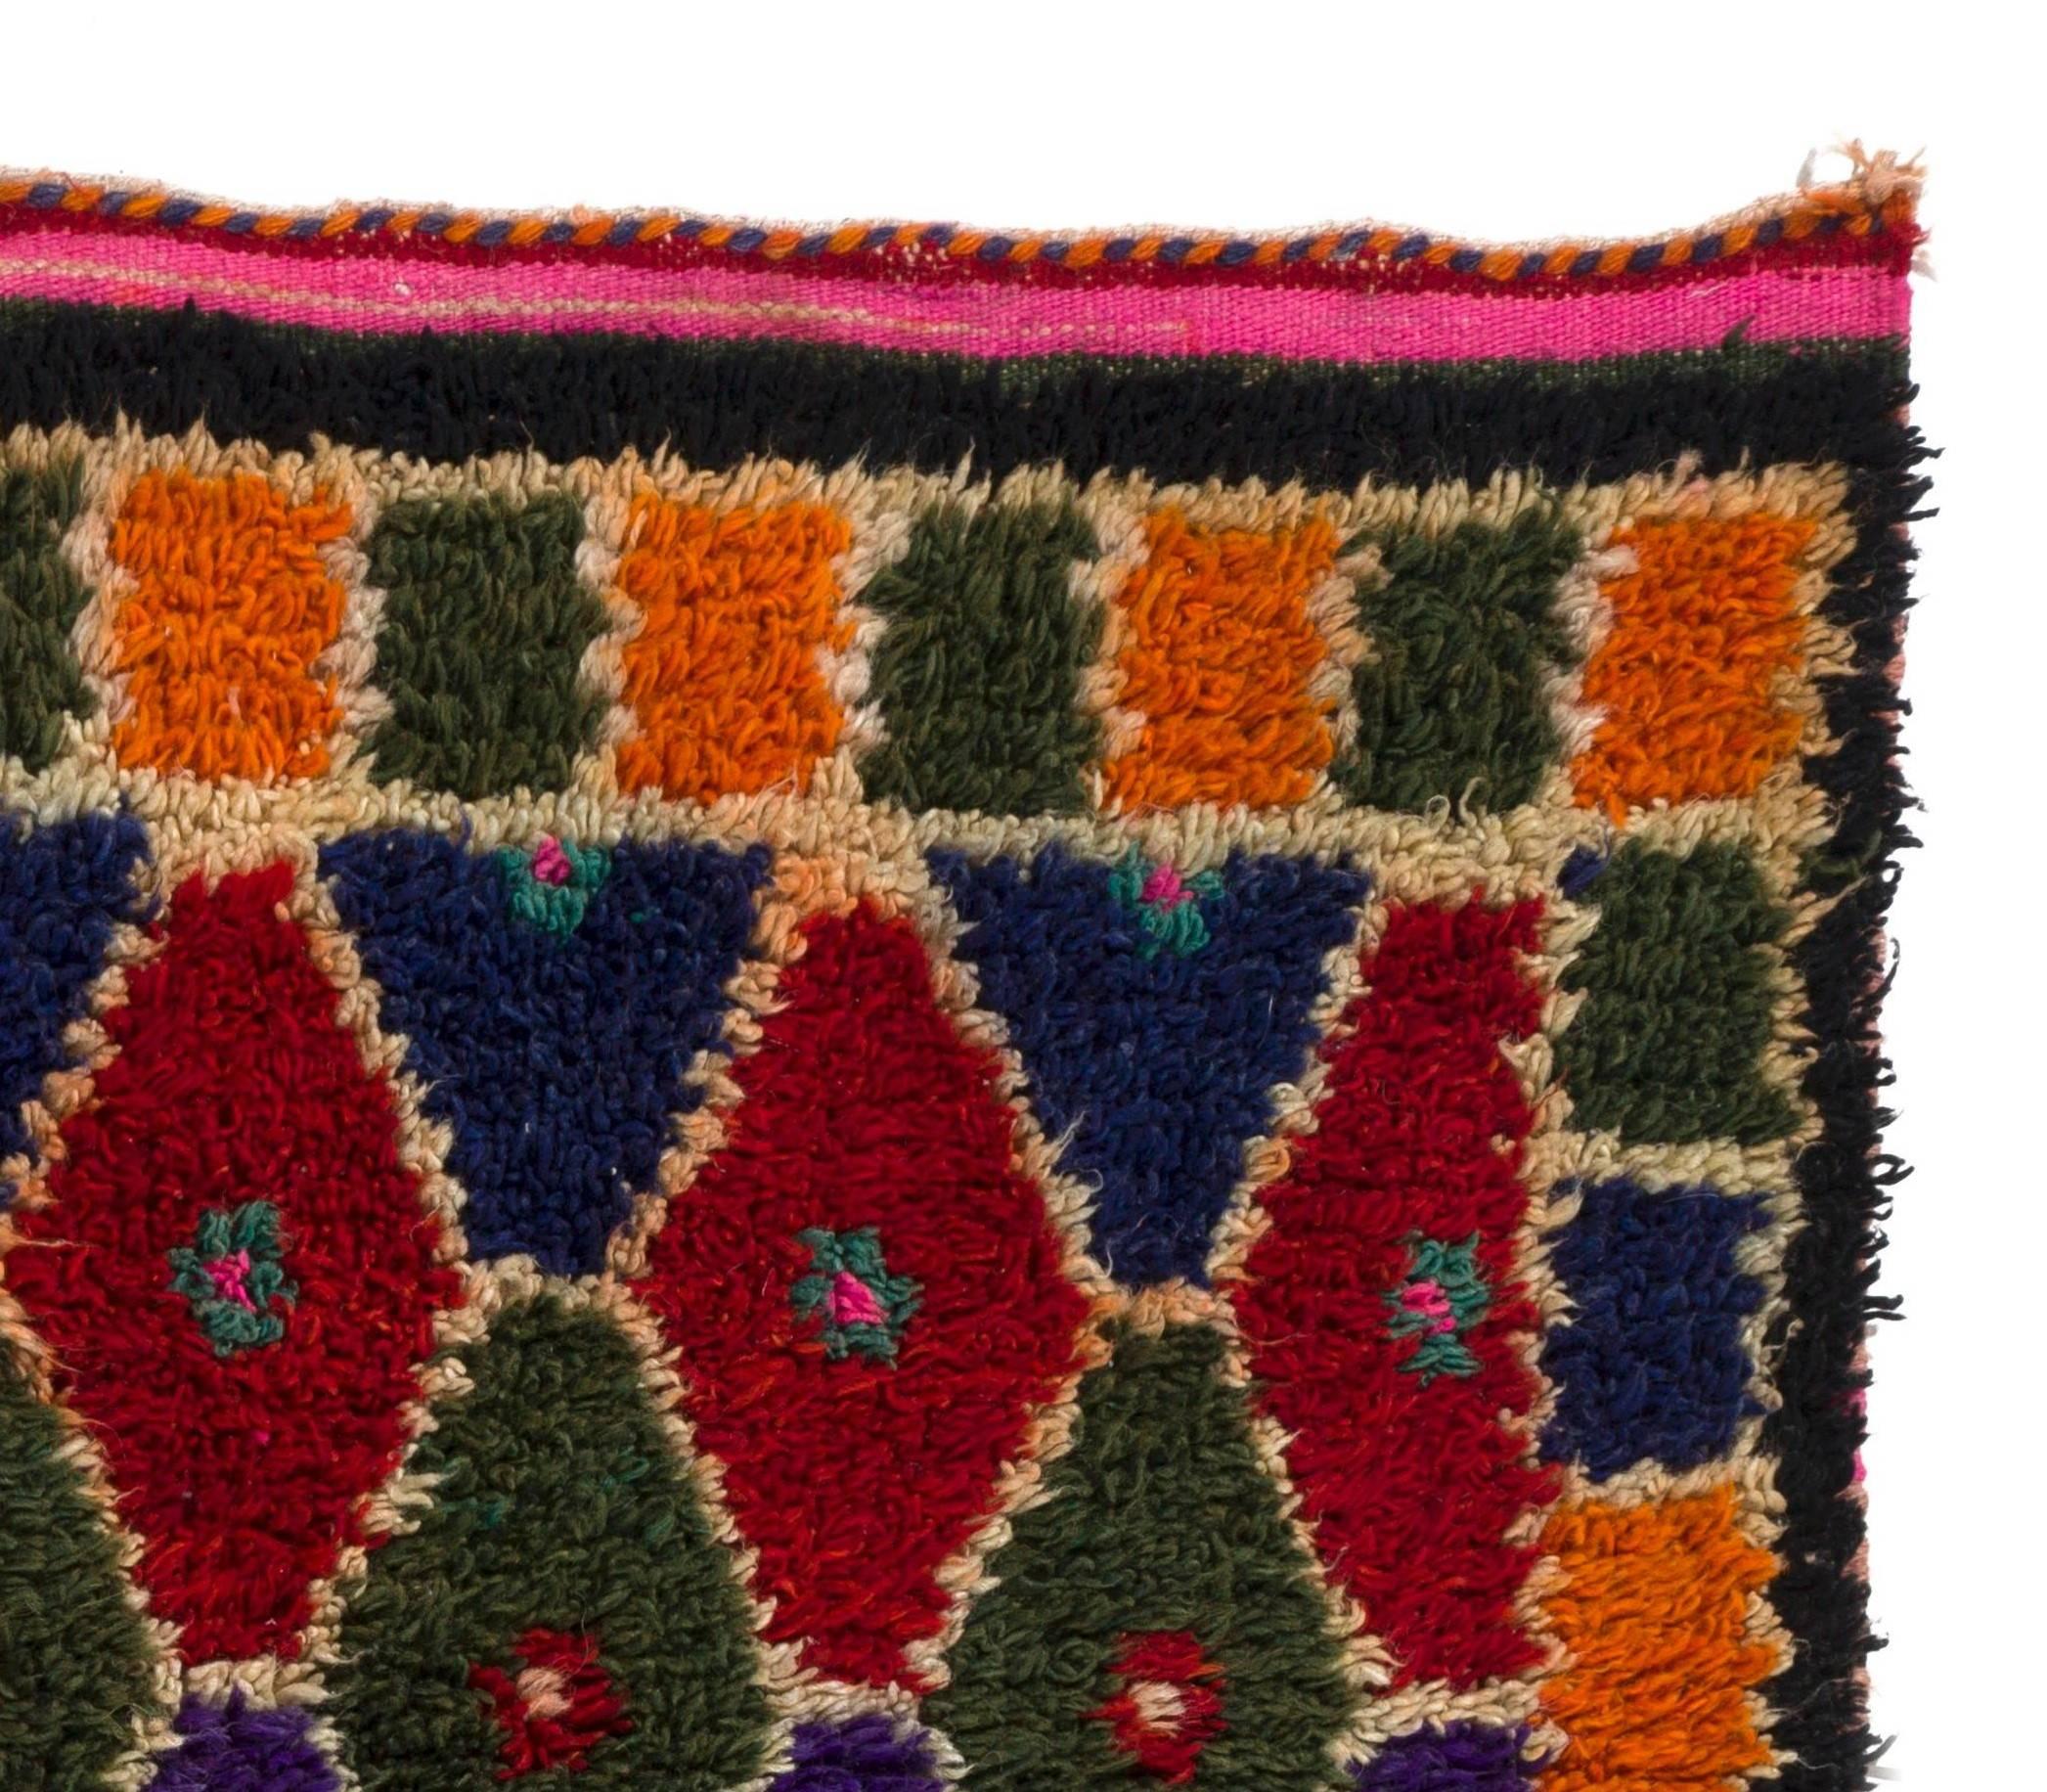 A vintage hand-knotted Tulu (high piled) rug from Konya in Central Turkey. The rug is made of lamb’s wool therefore it is very soft and comfortable. Measures: 3.3 x 5.3 Ft.
These small rugs with geometric simple designs and lustrous wool pile were